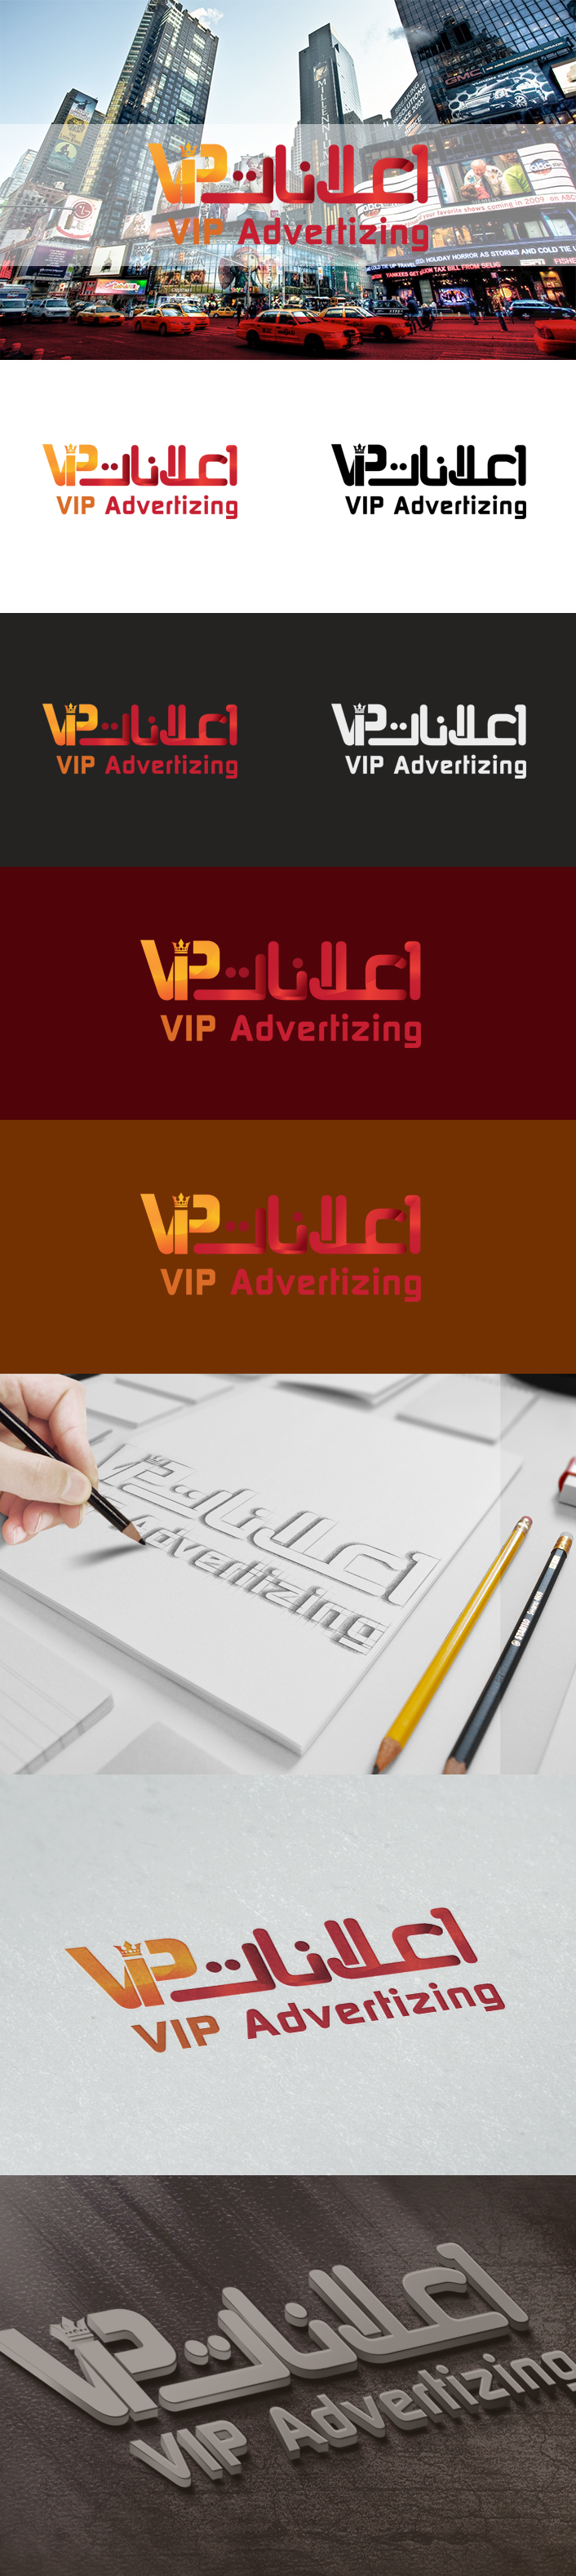 Vip advertisiing اعلانات